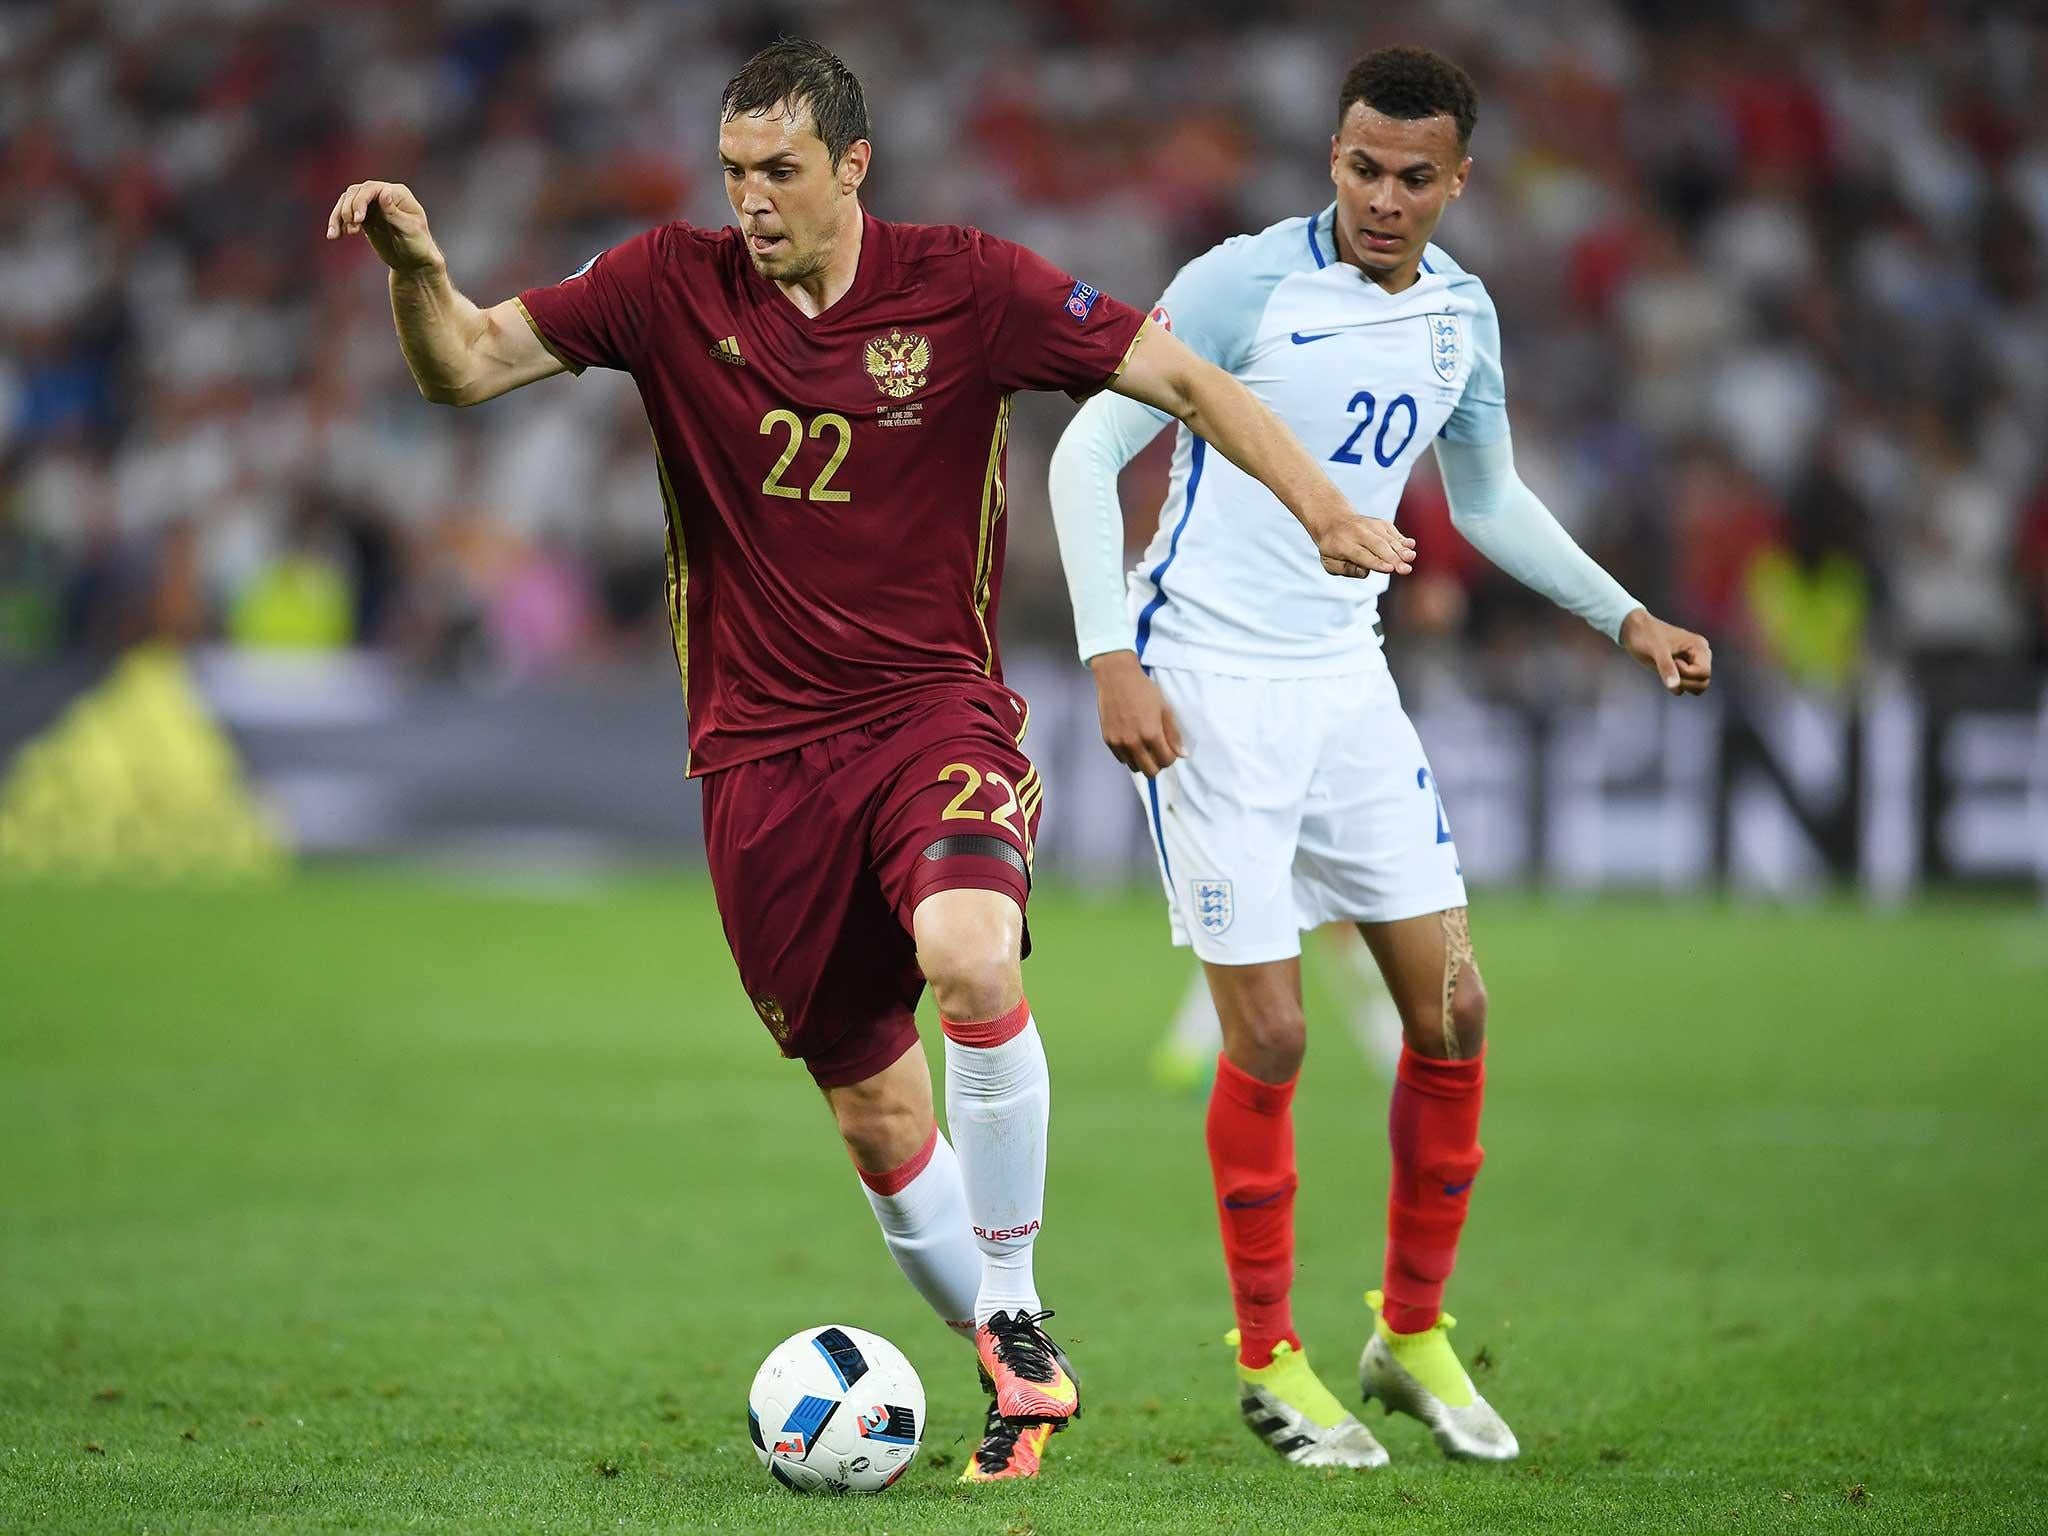 Artem Dzyuba, the Russia player, has defended his country's supporters